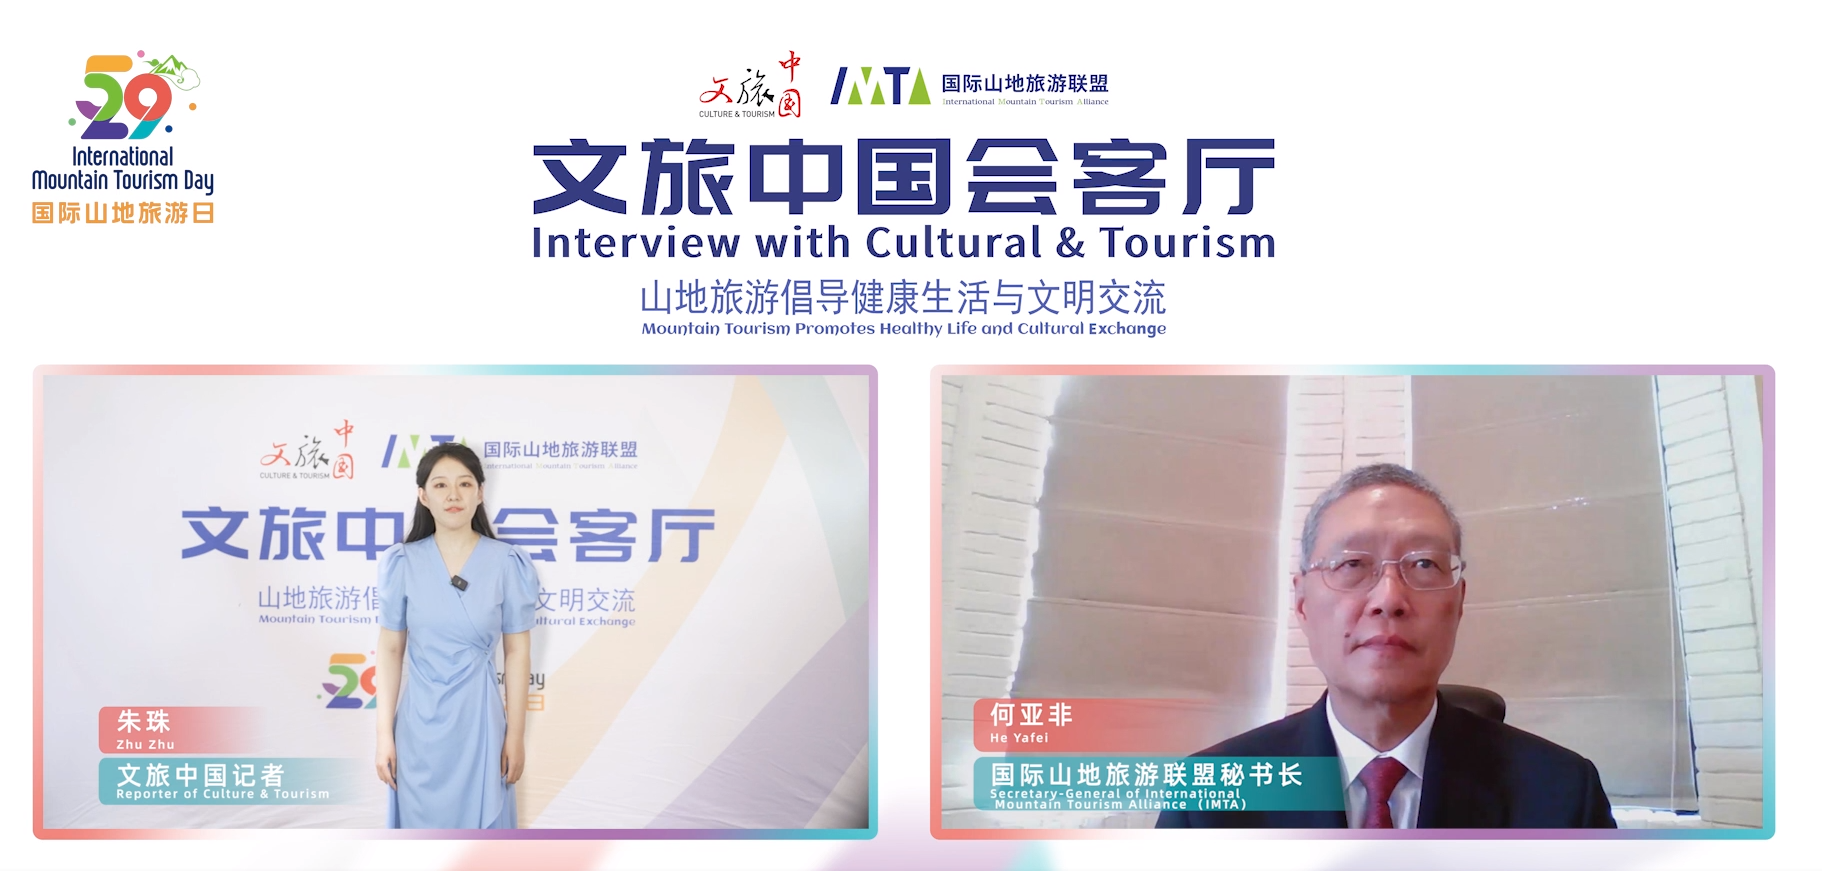 He Yafei: Innovating the Platform and Servicing the Industry